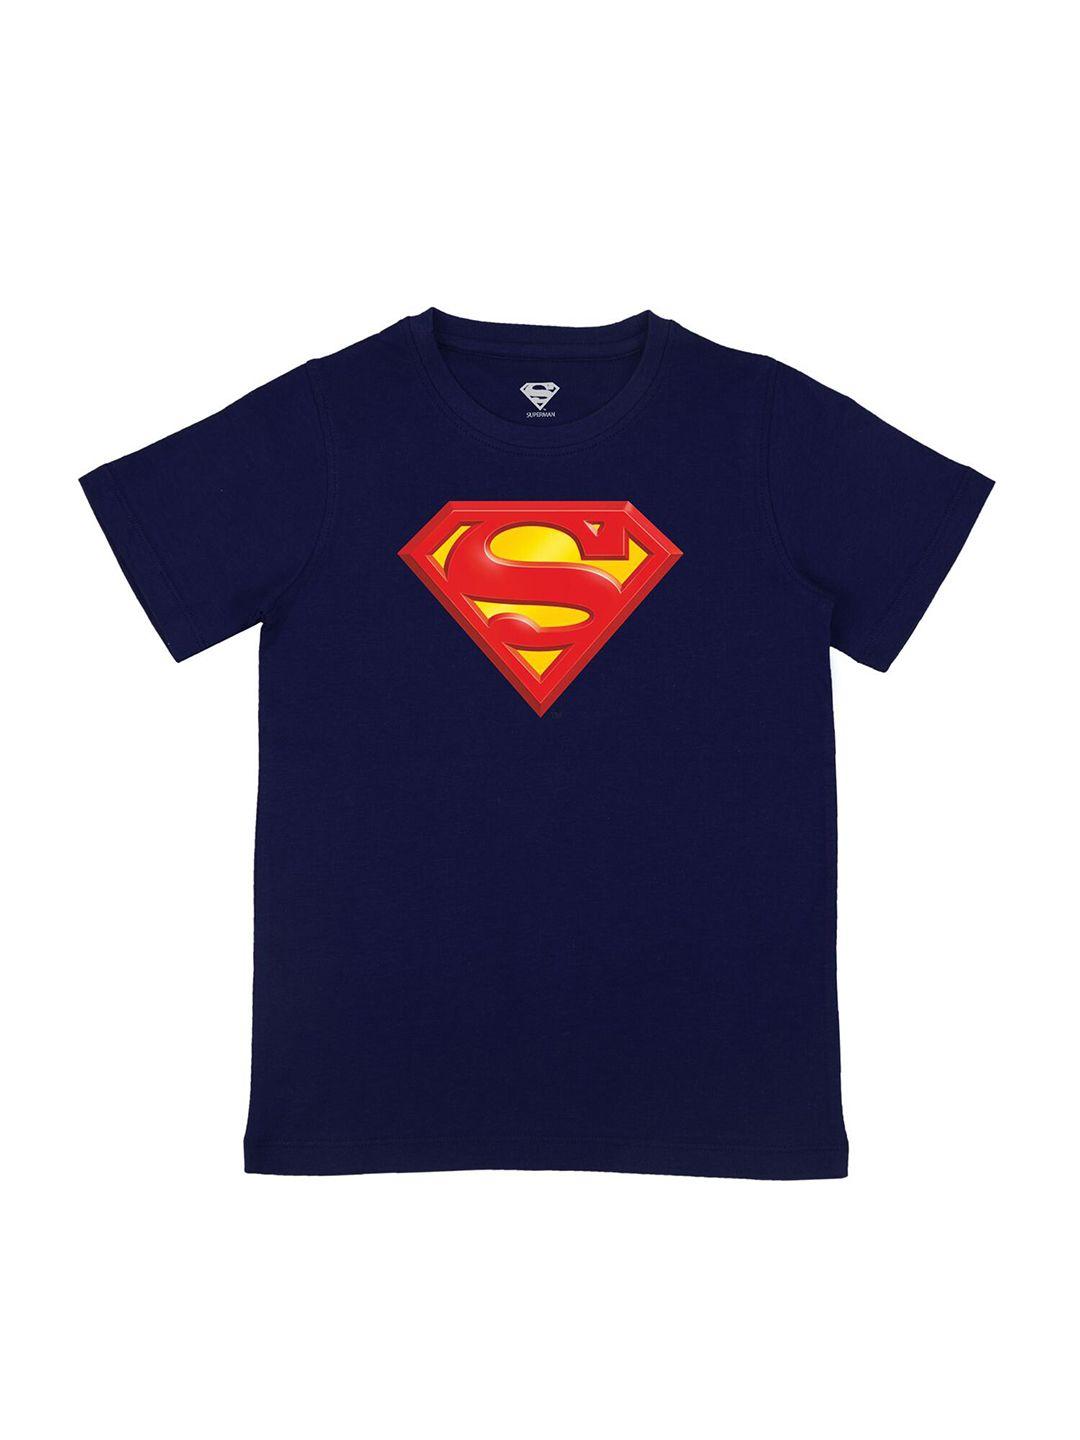 dc by wear your mind boys navy blue superman printed pure cotton t-shirt